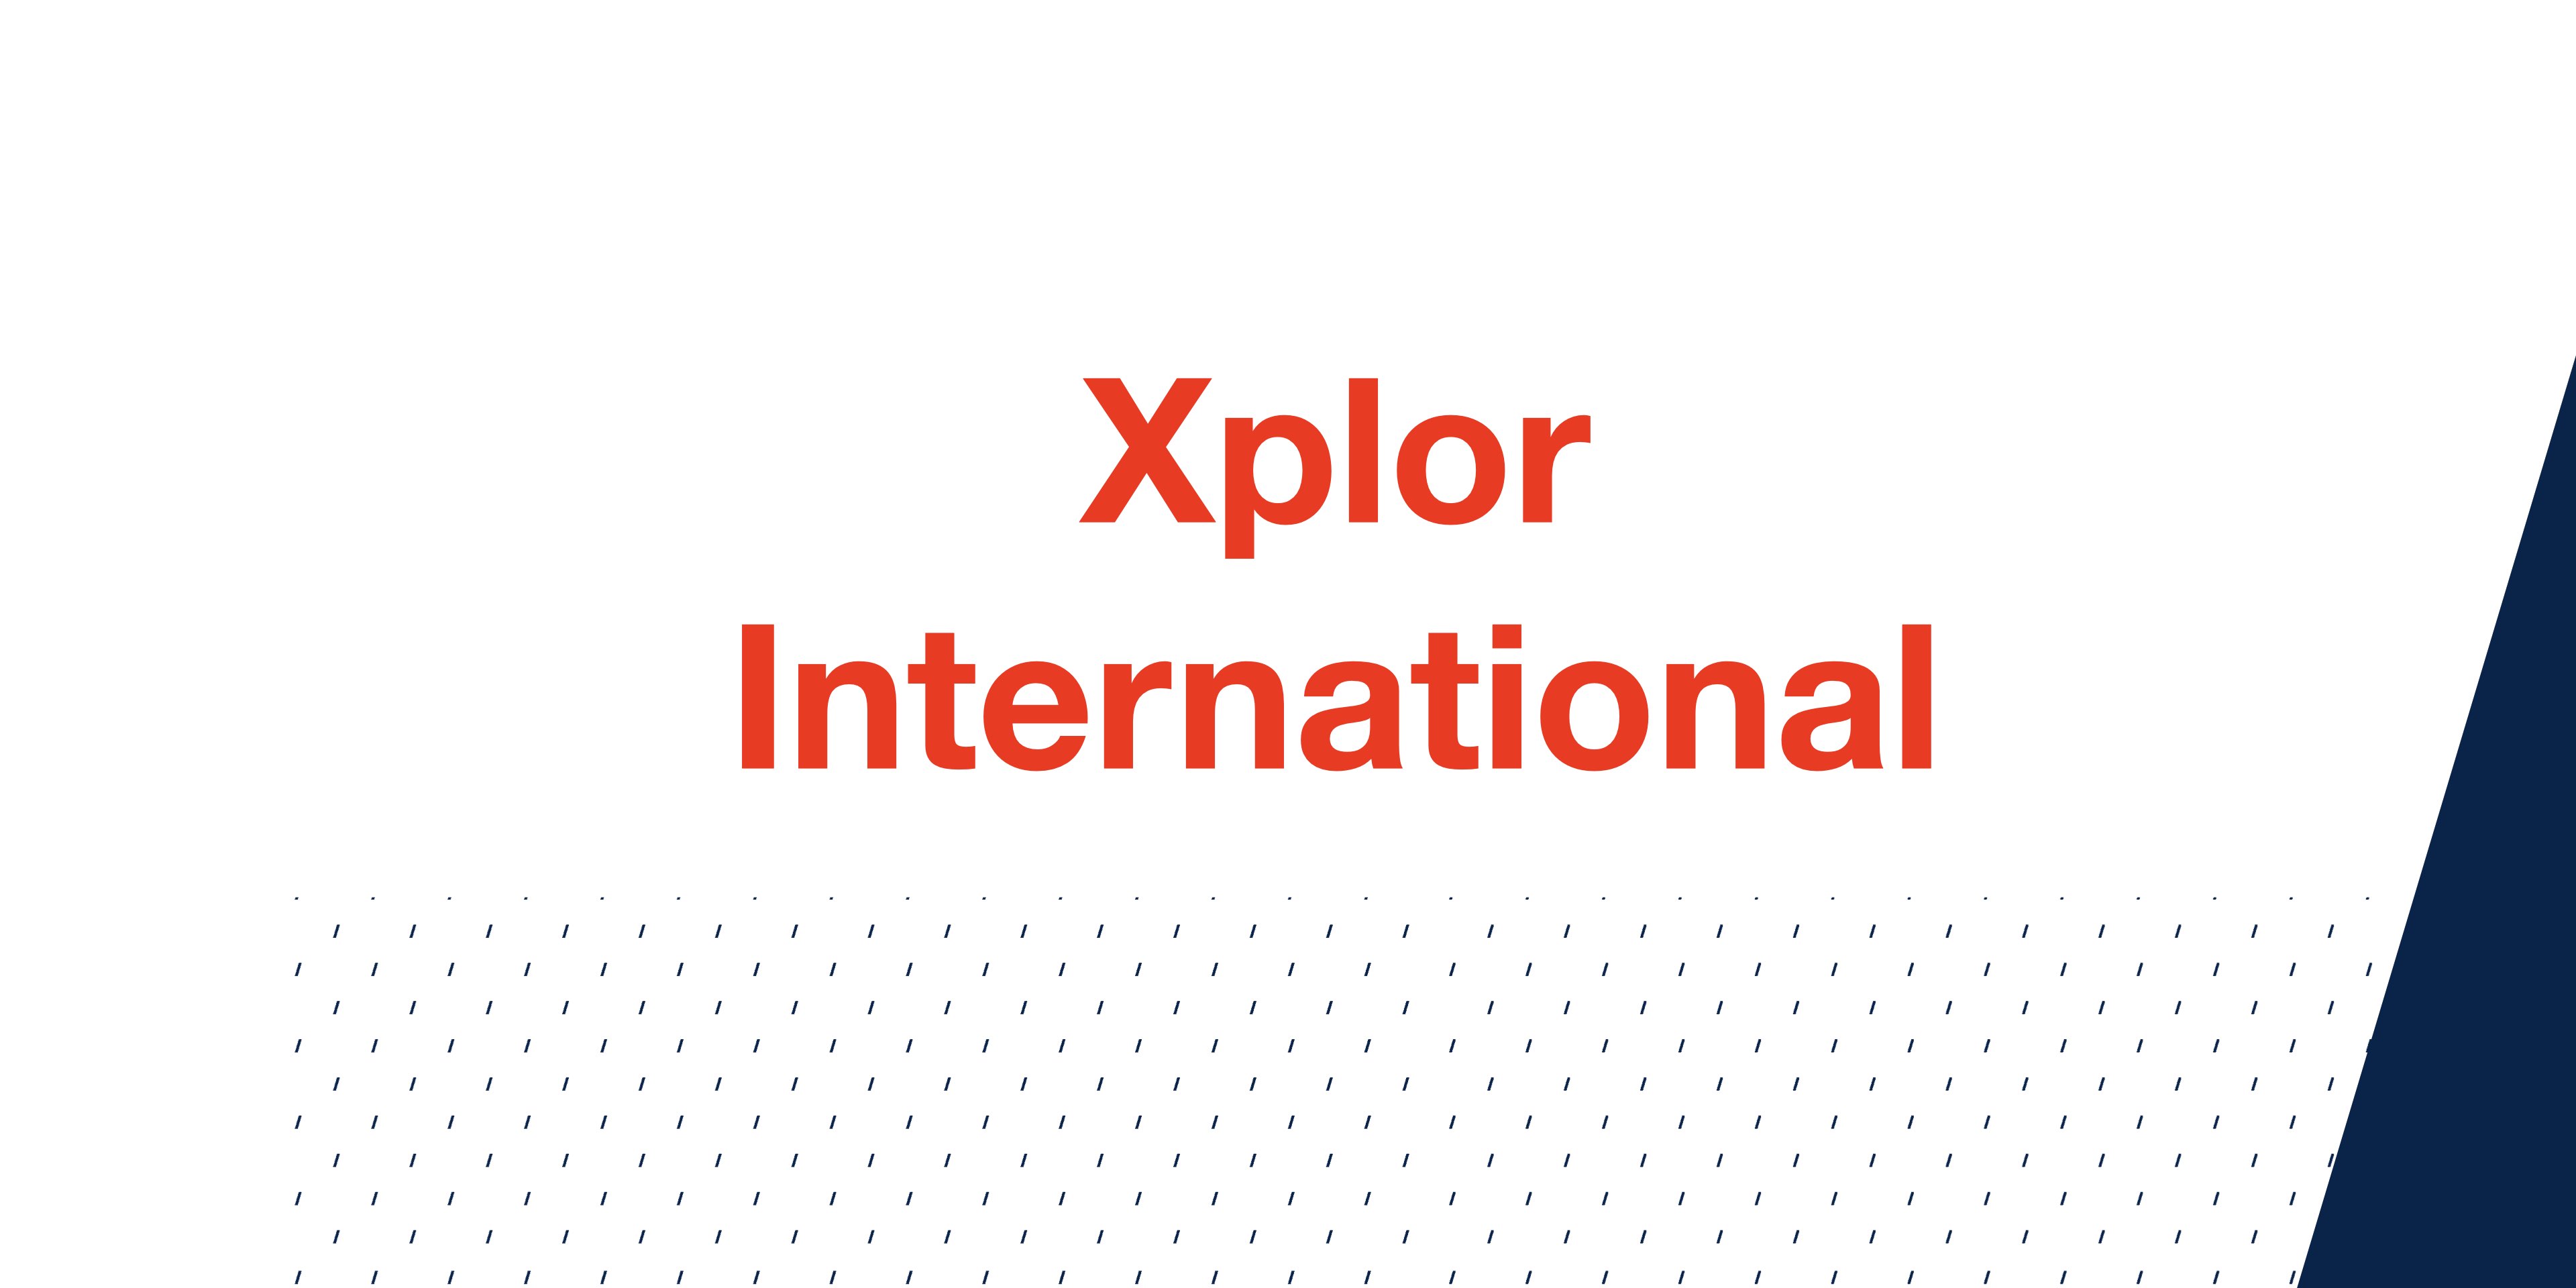 the text "xplor international" written in red on a white background